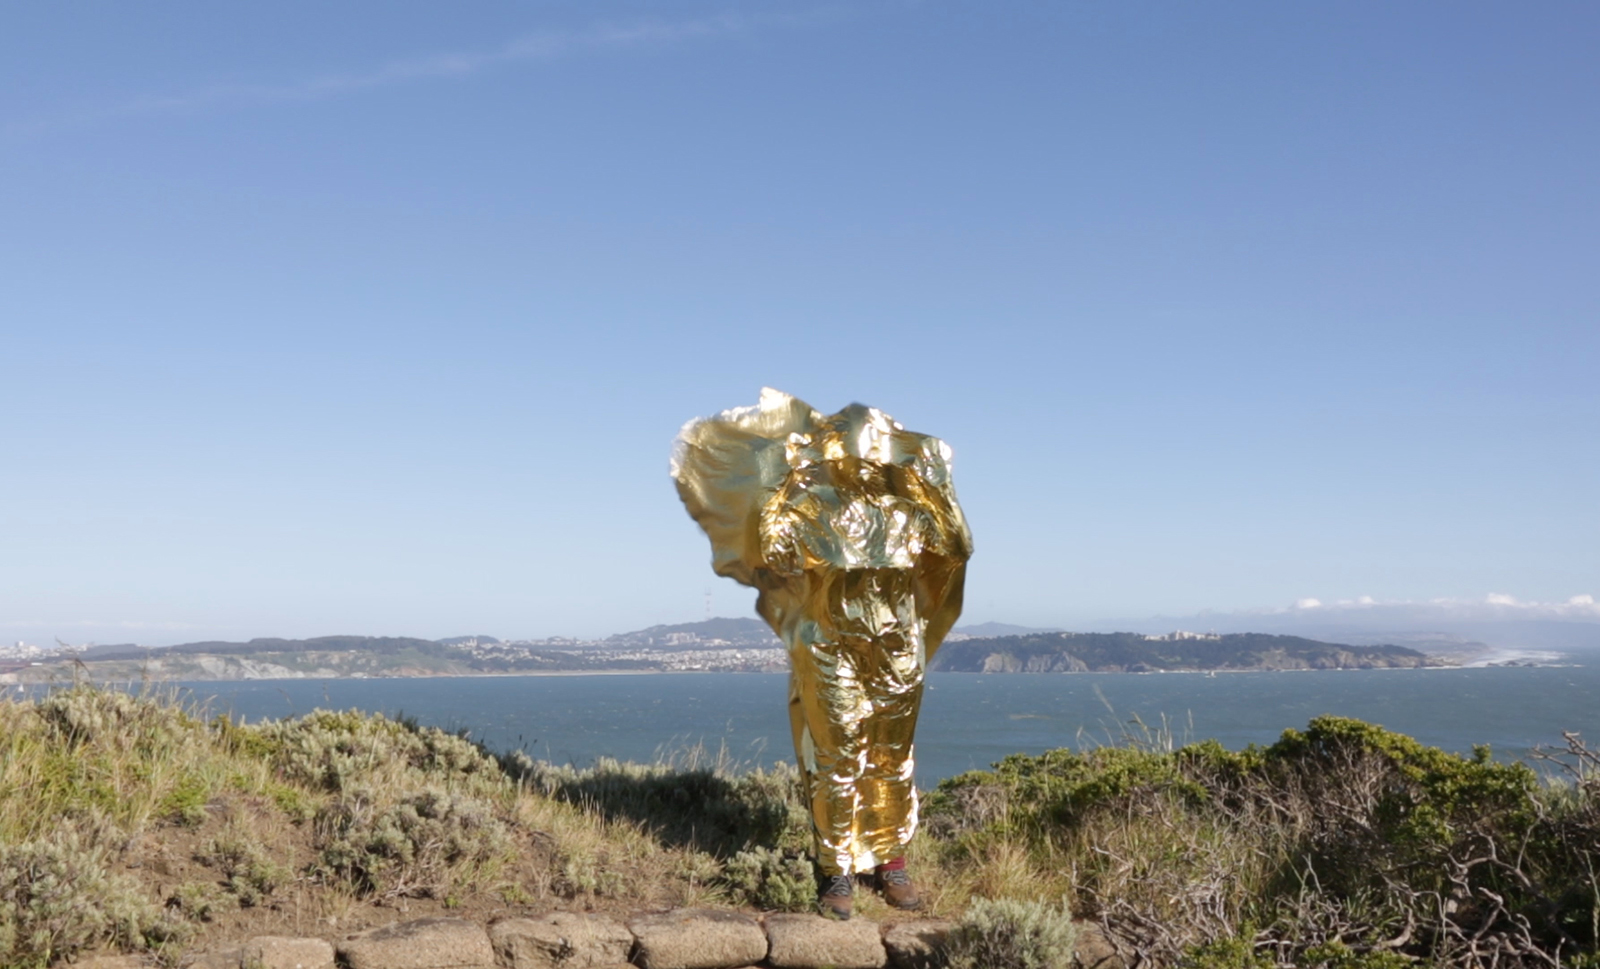 A figure holding up a gold emergency blanket, covering the whole body, stands on a hill overlooking the water